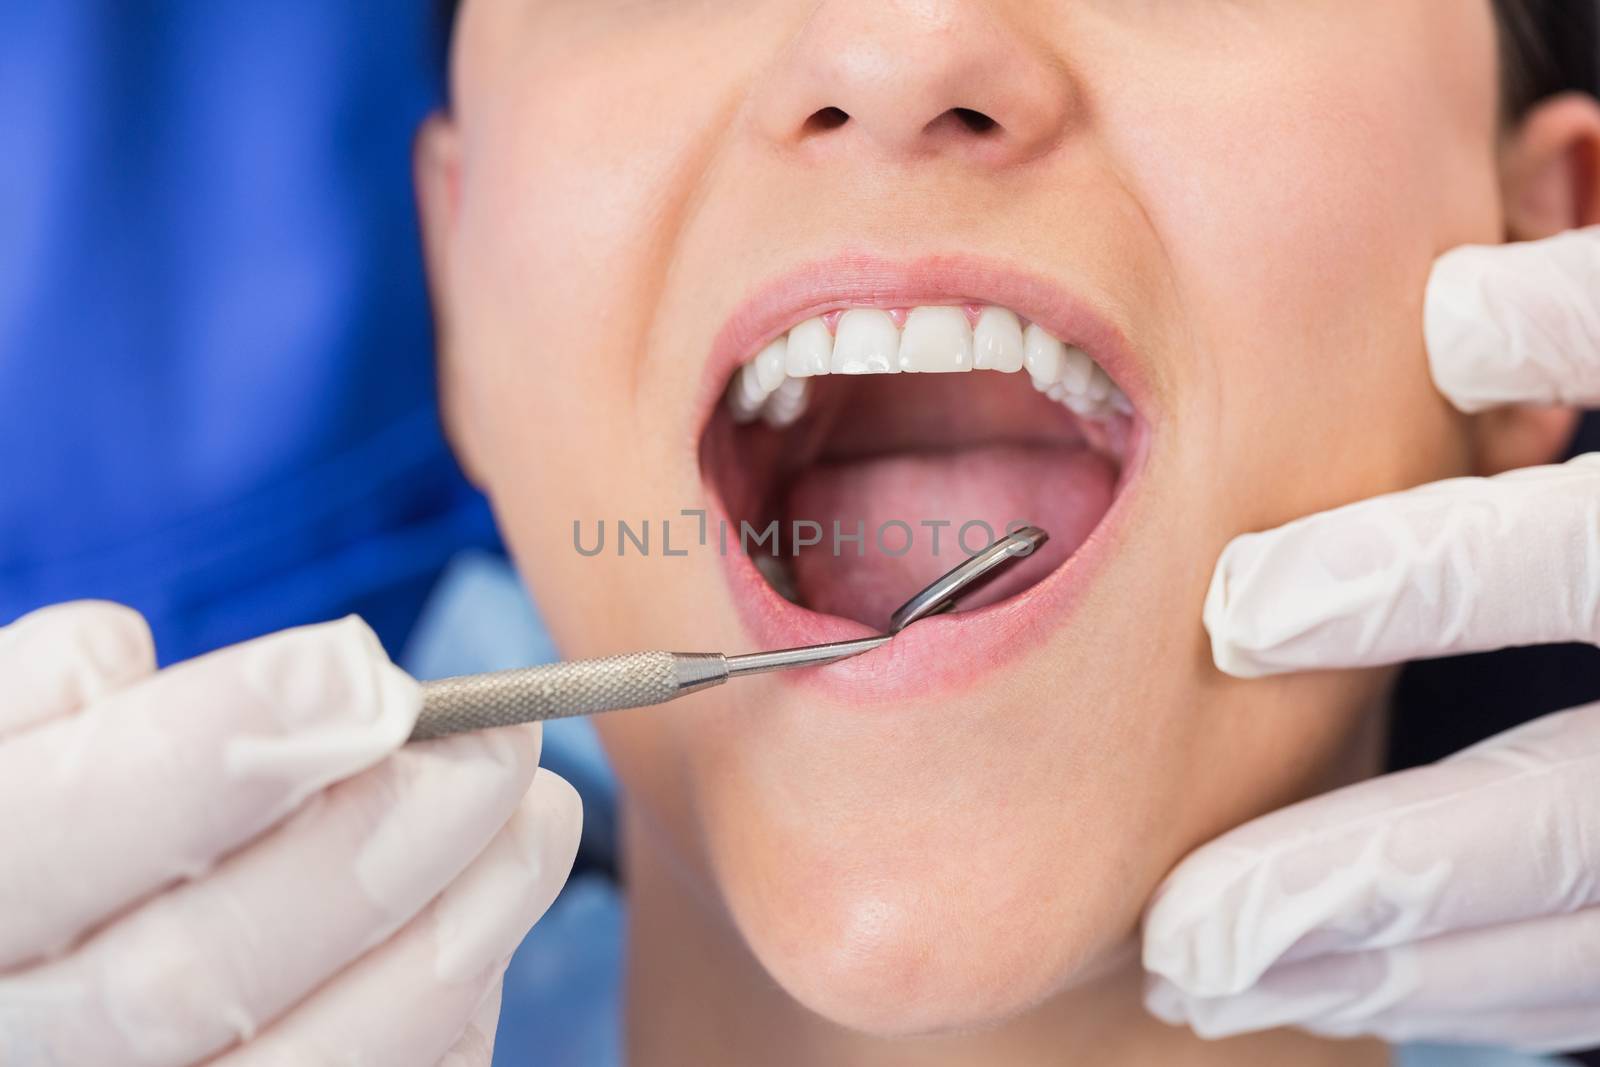 Dentist examining a patient with angle mirror by Wavebreakmedia